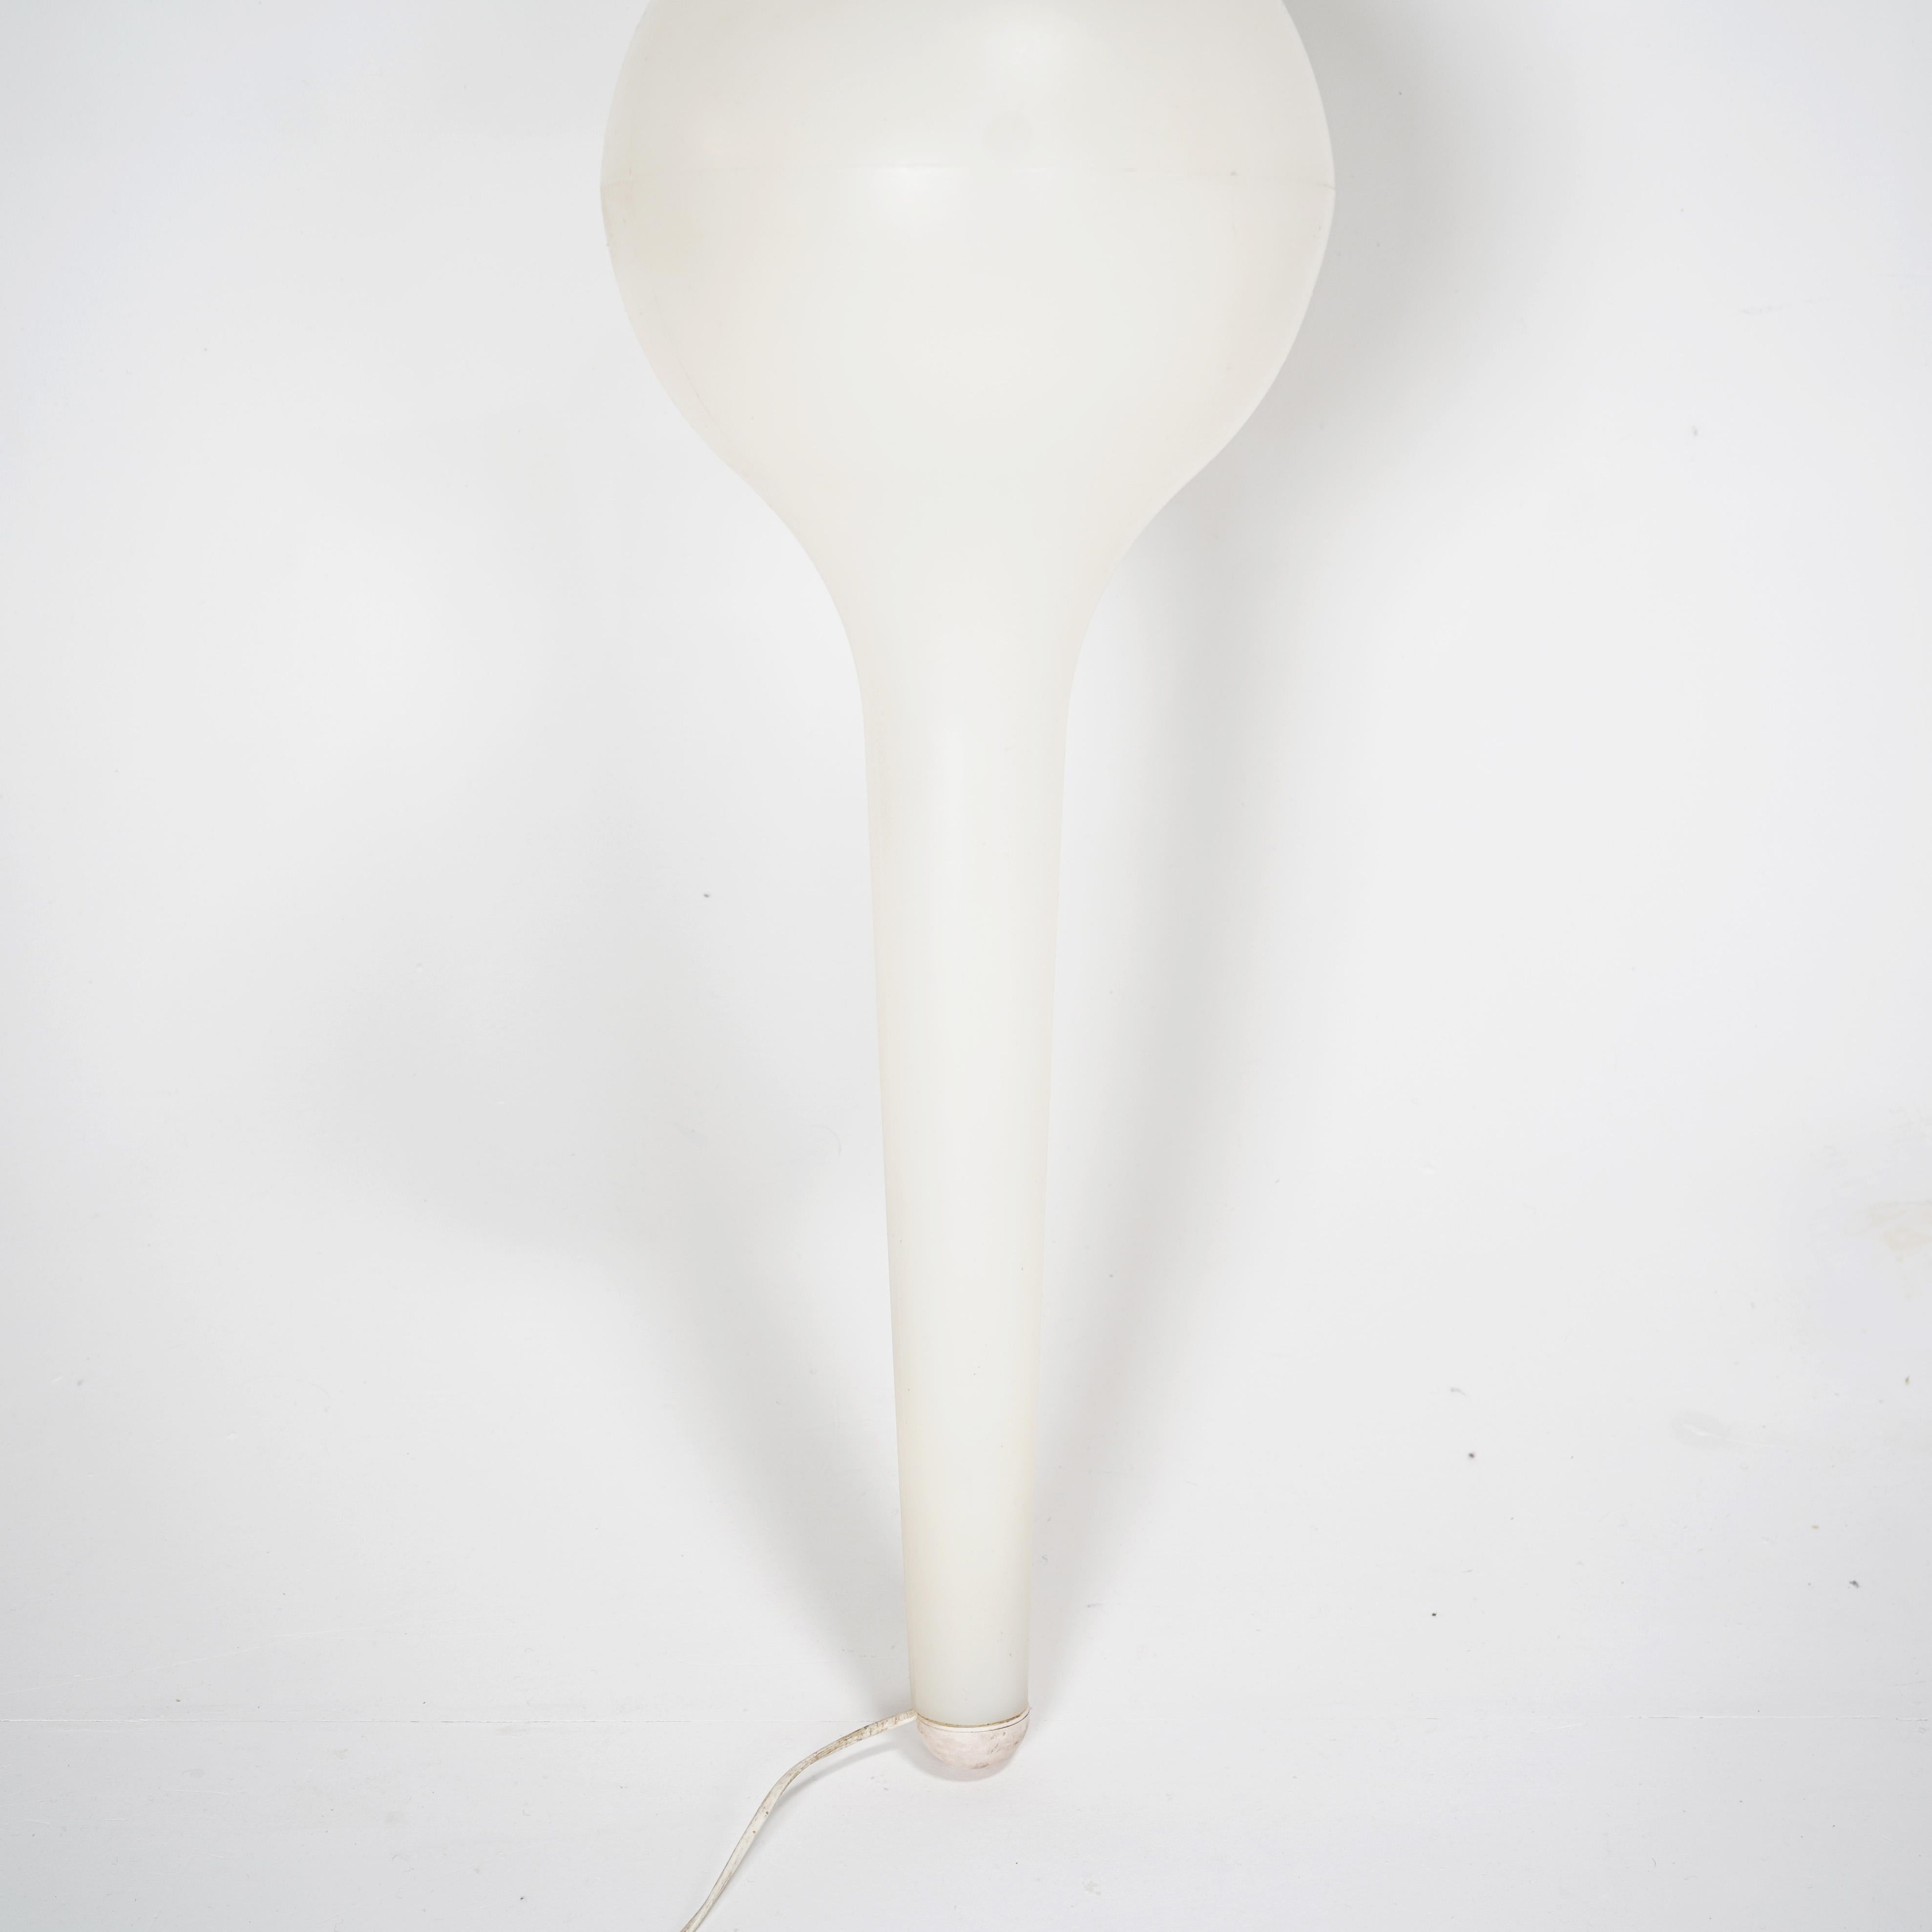 
1990s 'Sticklight' by Michael Young. 
Originally designed in 1994 at the climax of the British pop phenomenon.
The Sticklight was produced in rotationally moulded polyethene with a fluorescent stick light tube and became an instant British classic.